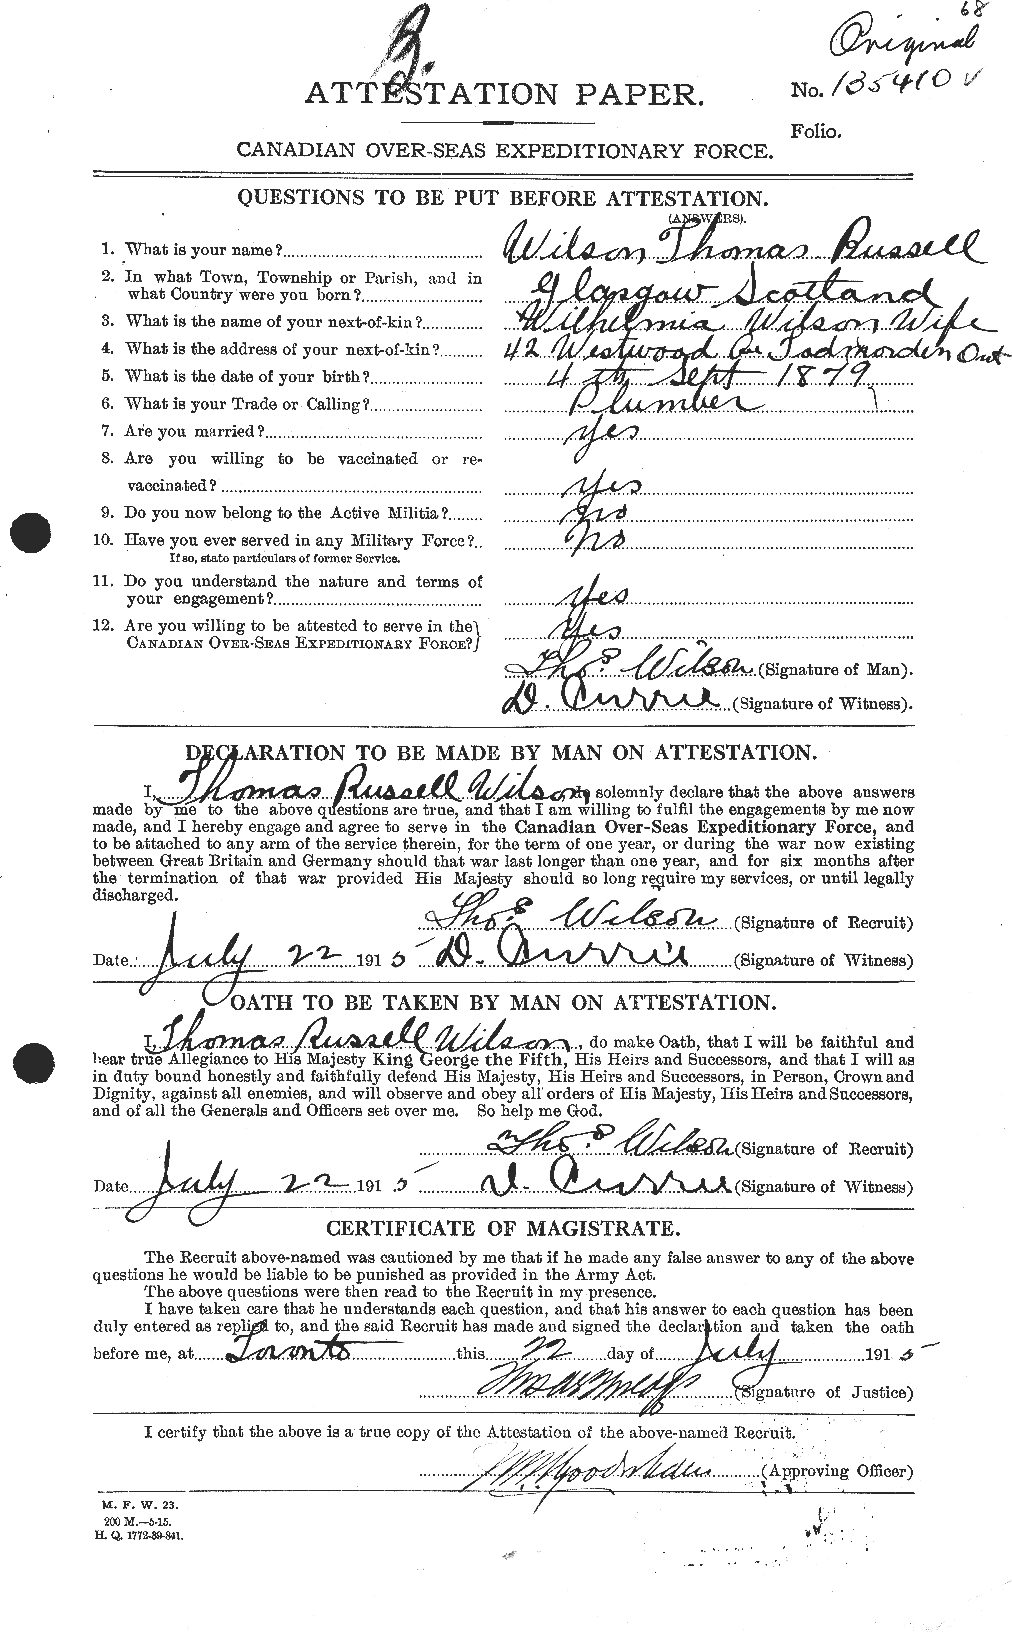 Personnel Records of the First World War - CEF 681689a